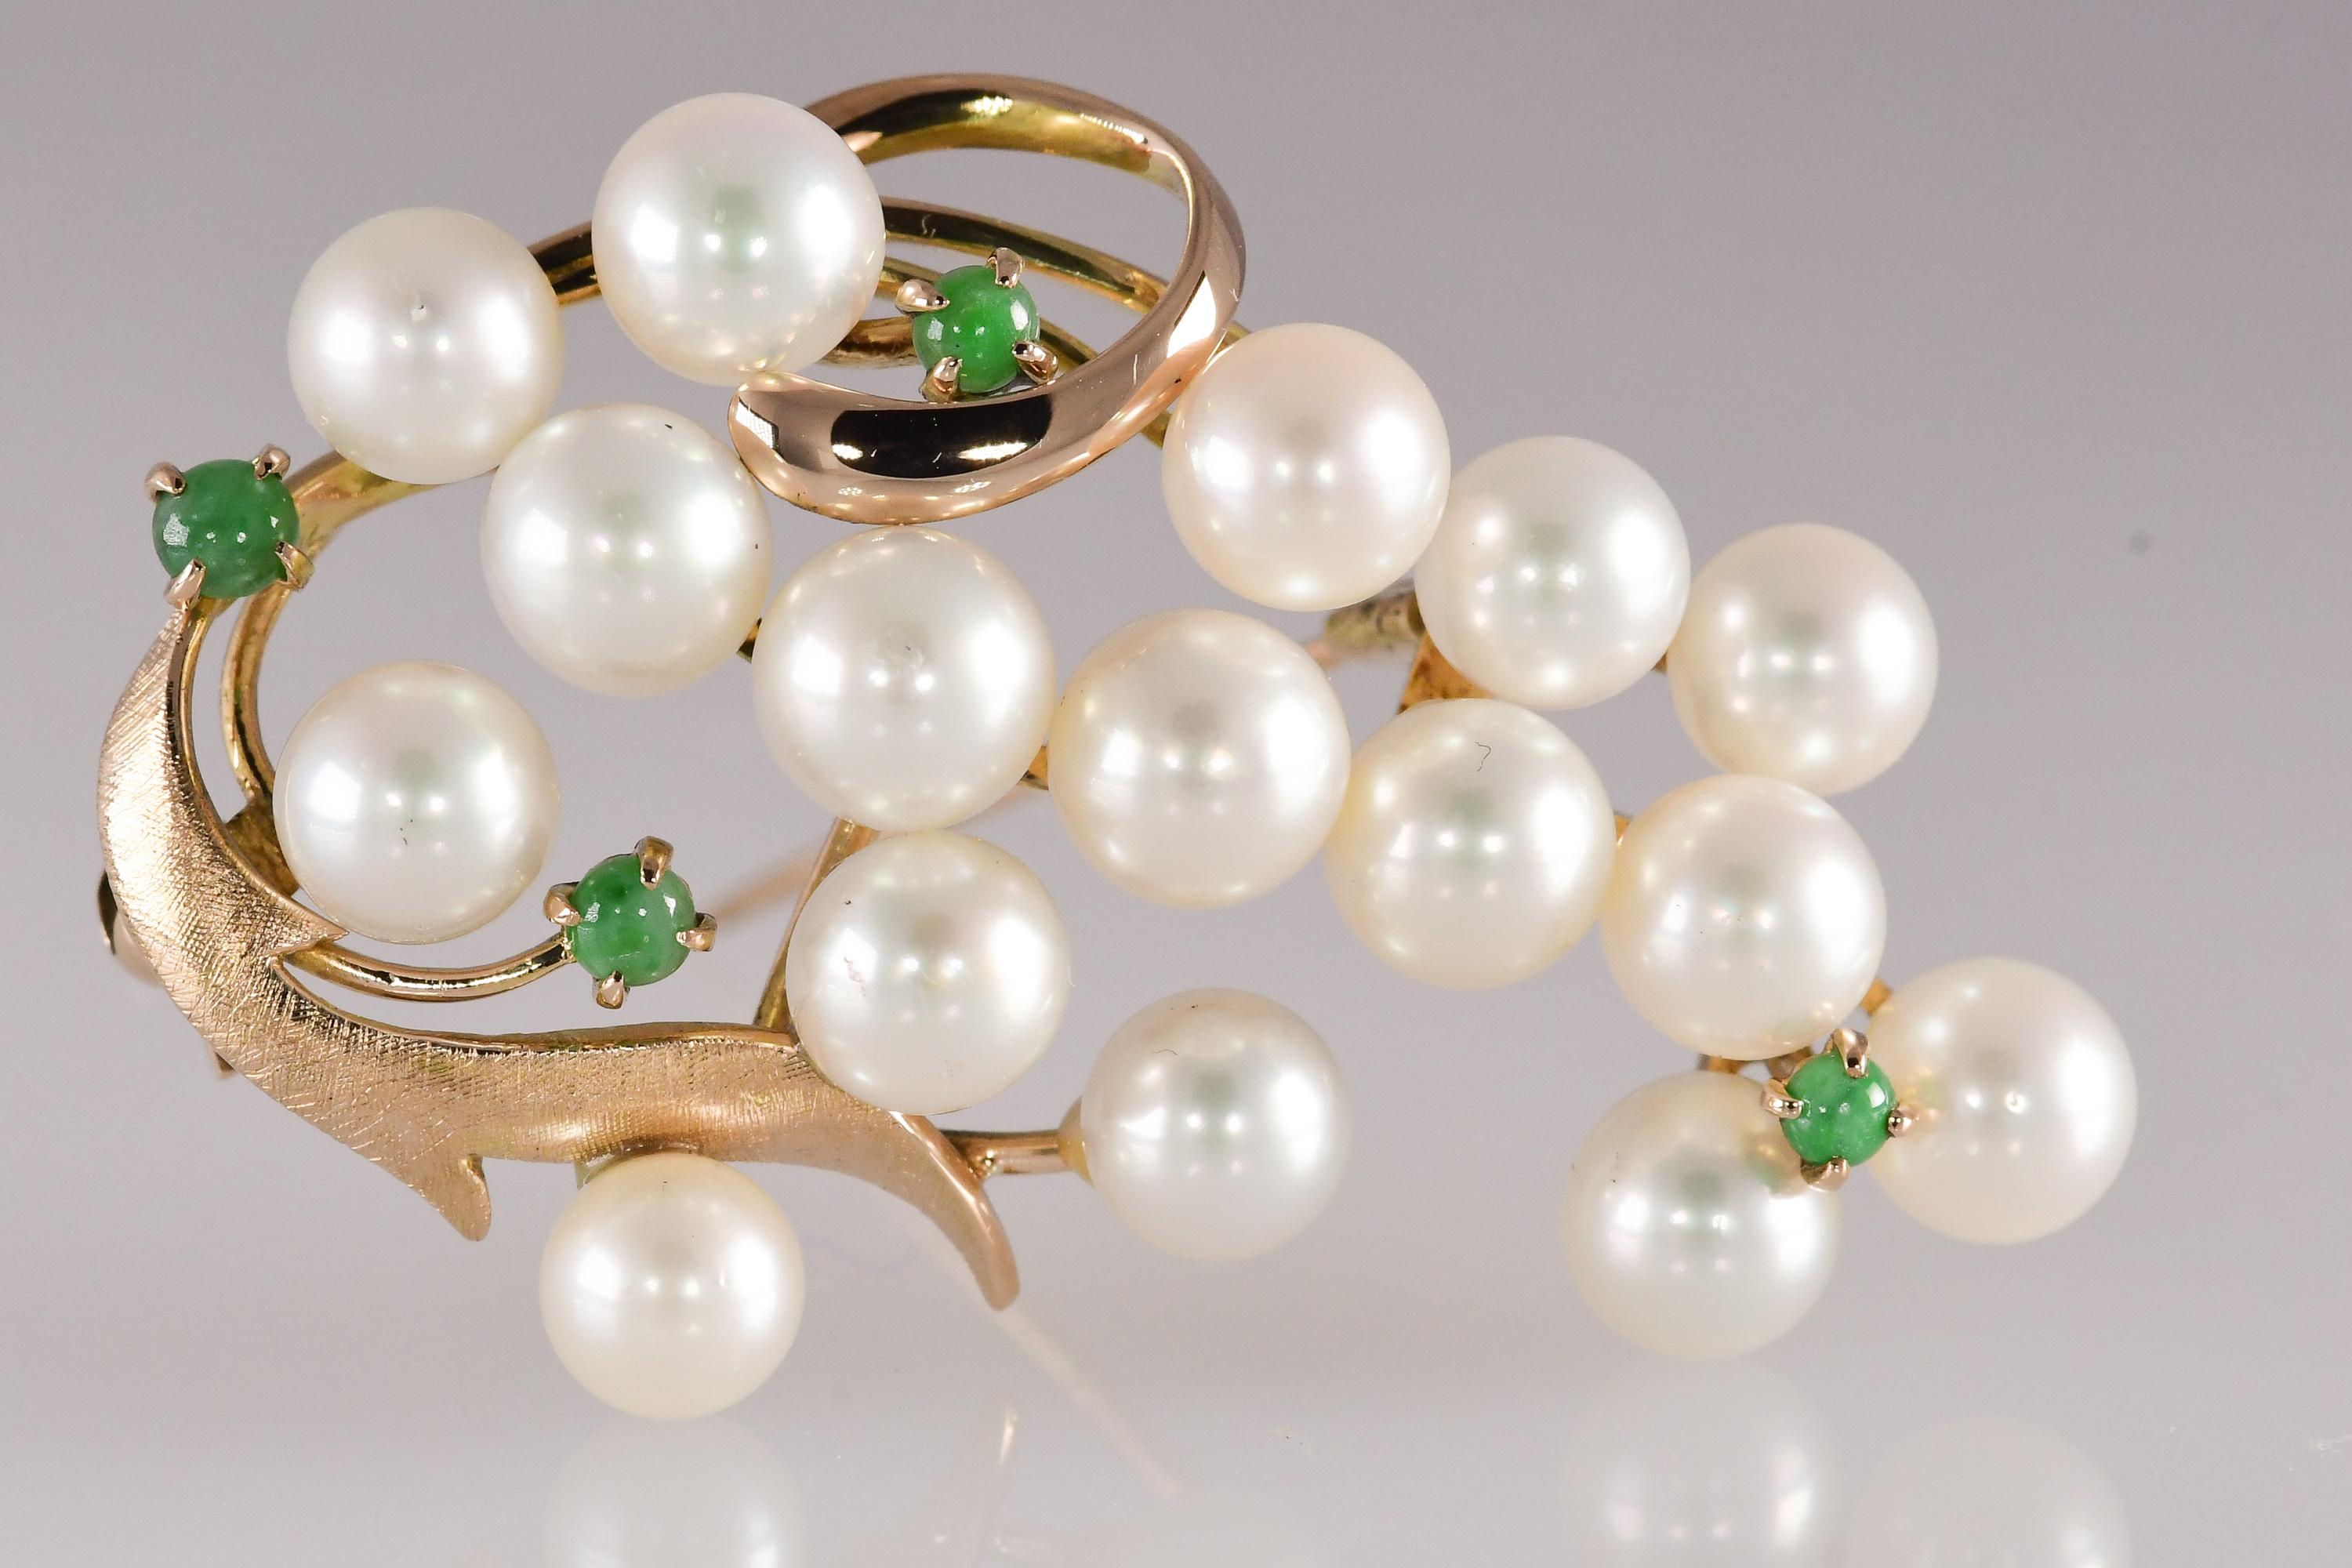 16 Akoya pearls with very high luster and no blemishing measure approximately 6 to 6 1/2 millimeters in diameter. Accenting the pearls are 4 round cabochon natural jadeite jade gemstones. The 14 karat yellow gold brooch measures approximately 1 7/8